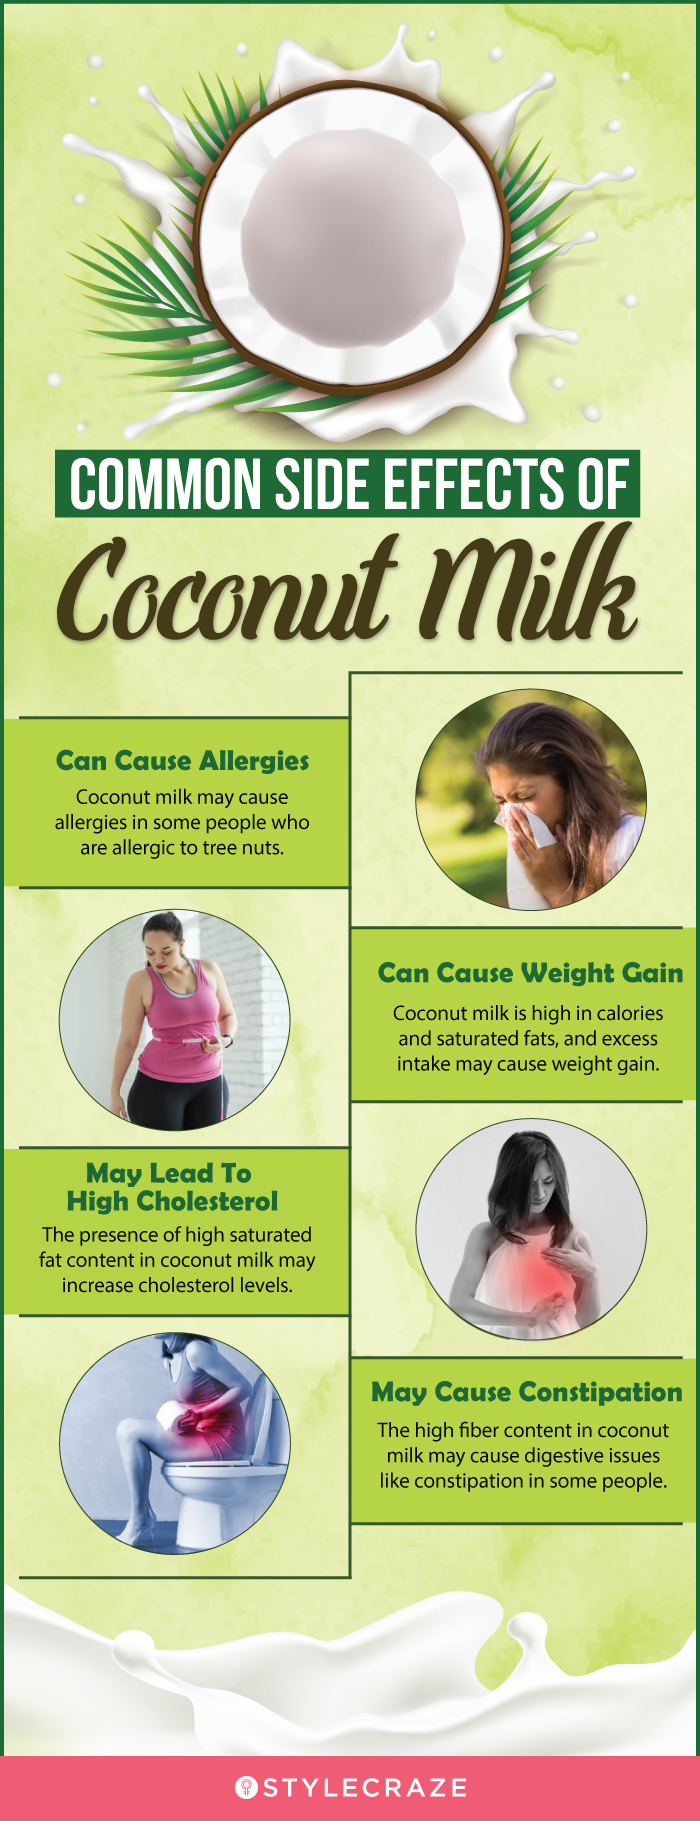 common side effects of coconut milk (infographic)